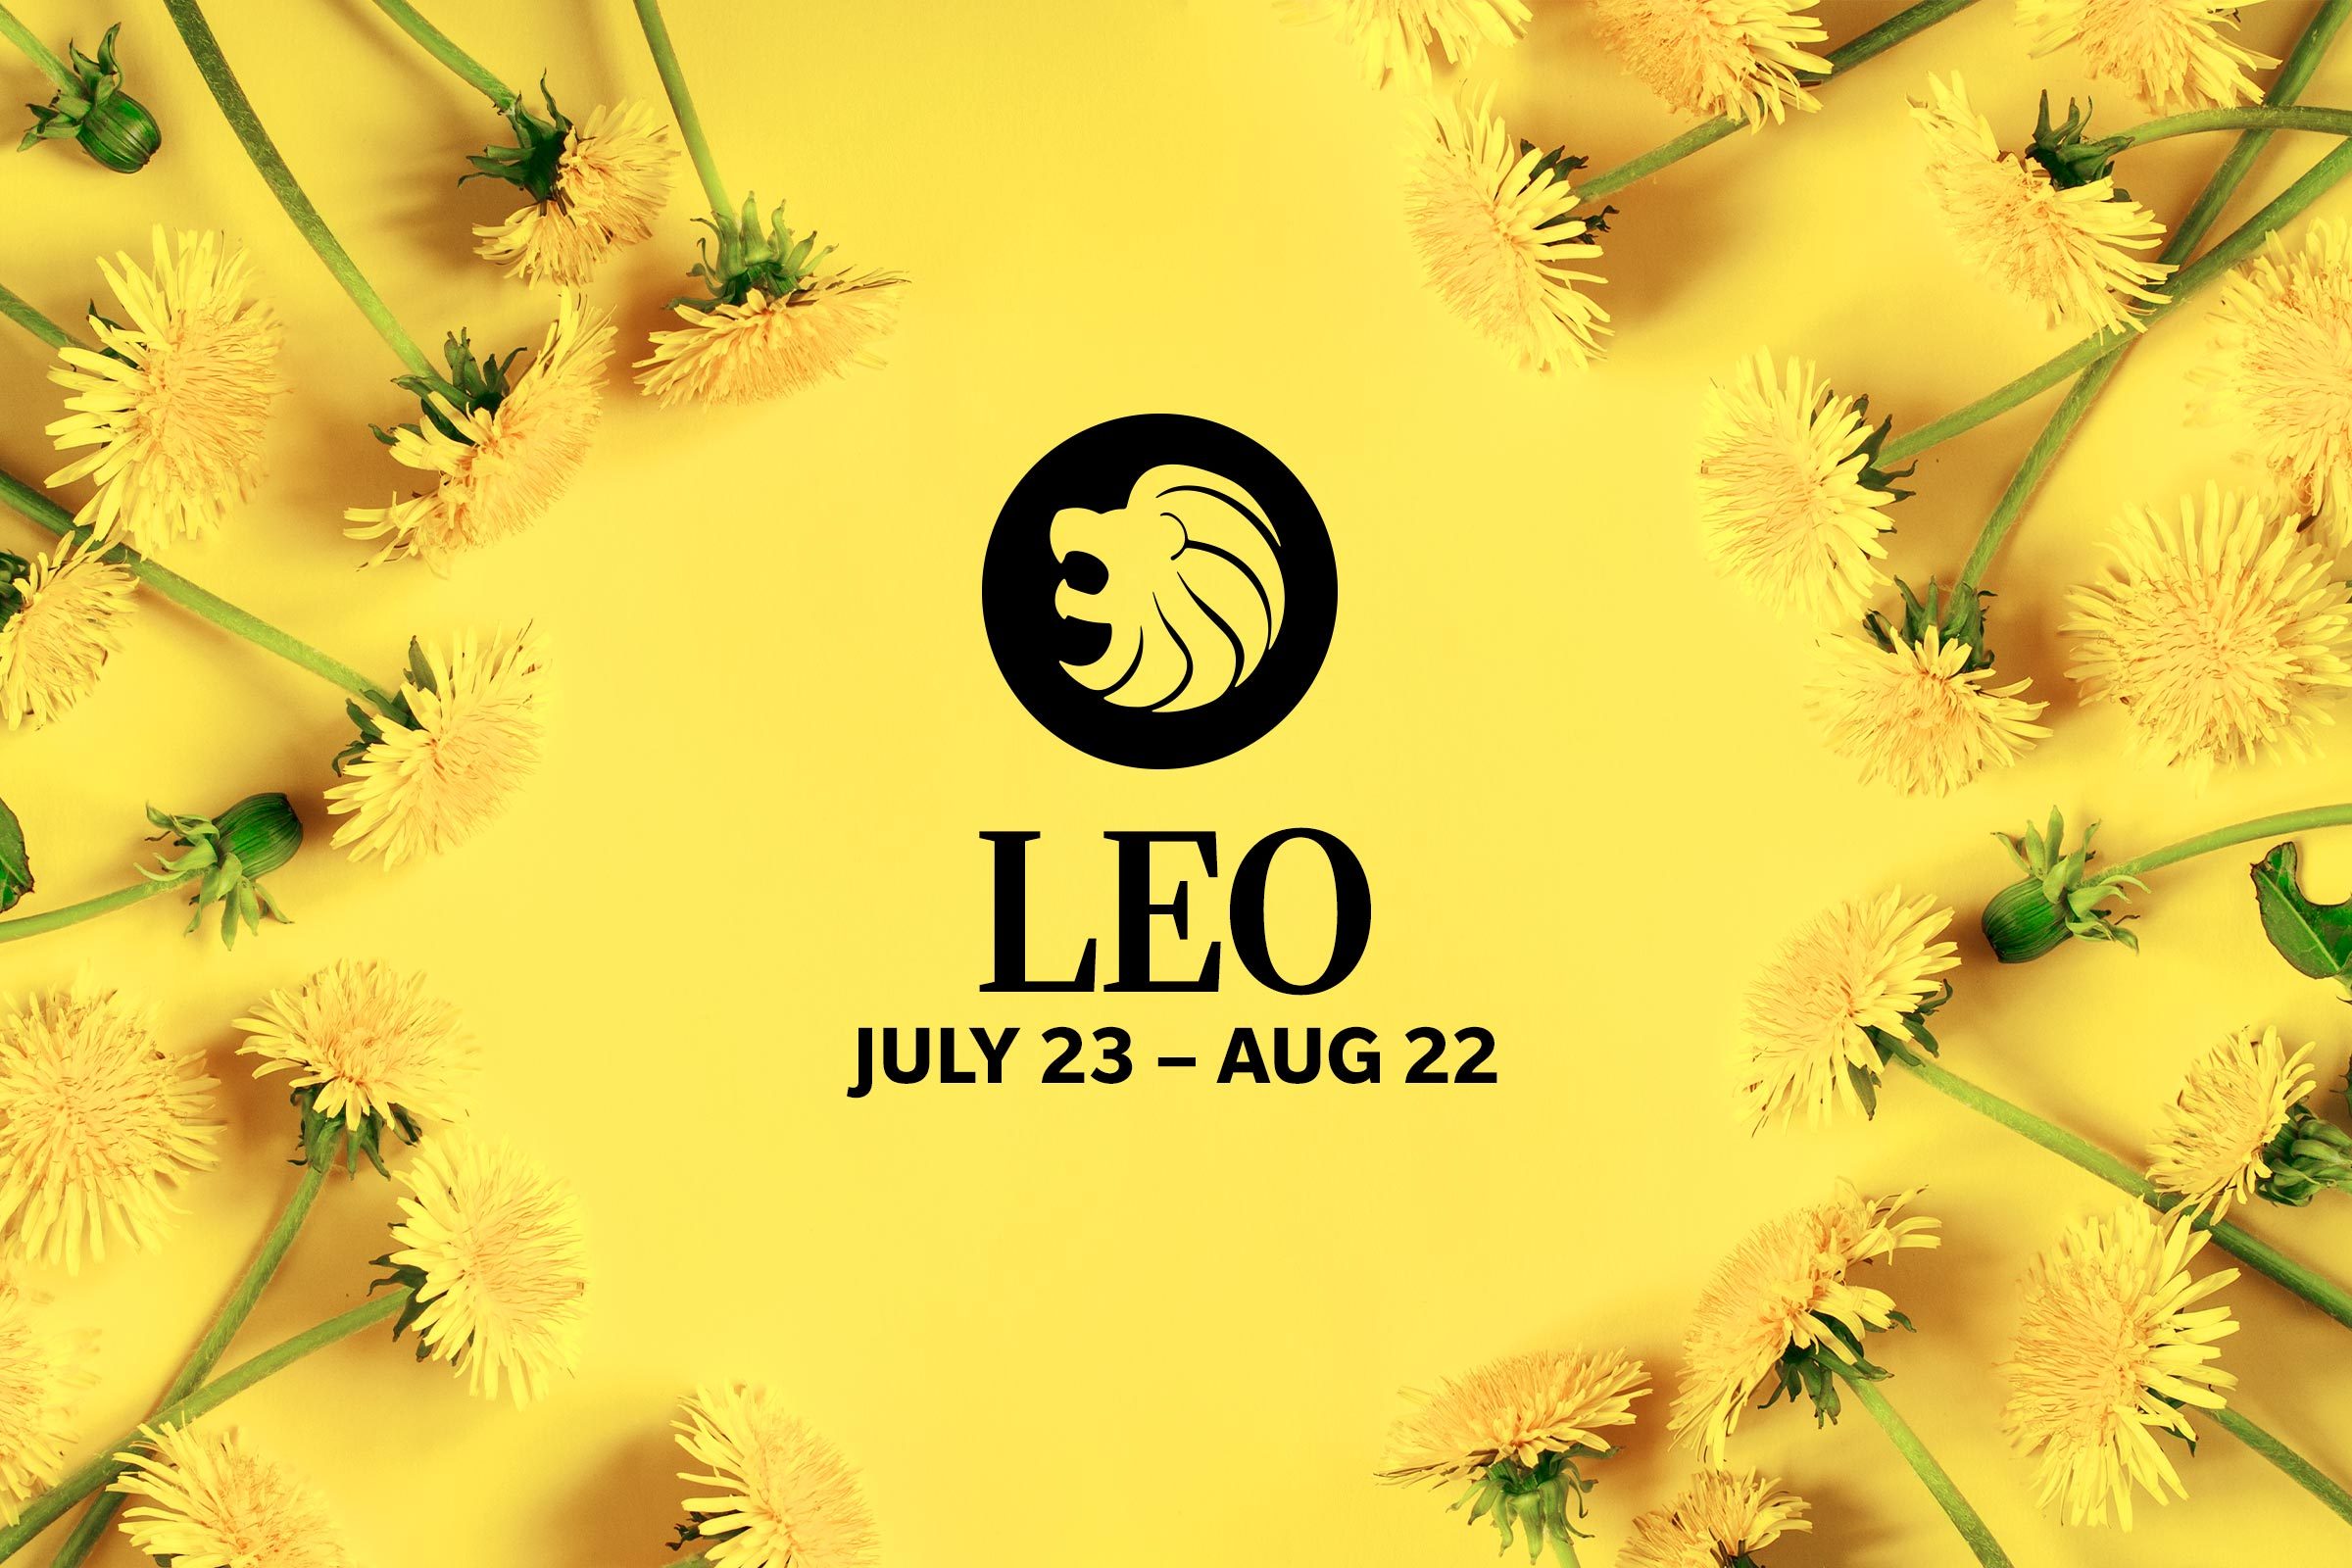 Leo (July 23-August 22)